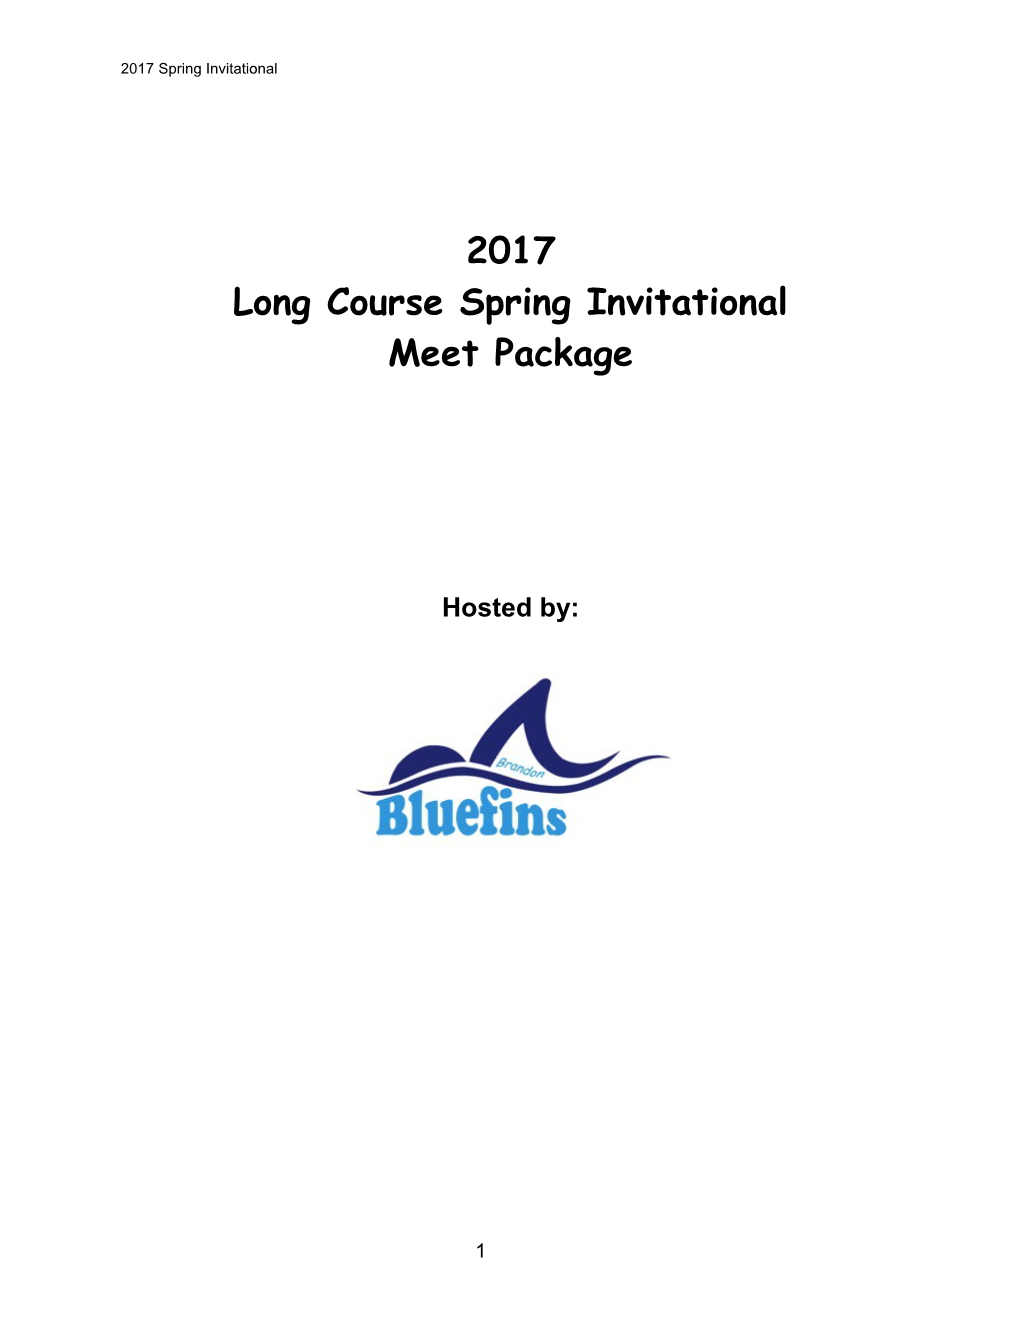 Long Course Spring Invitational